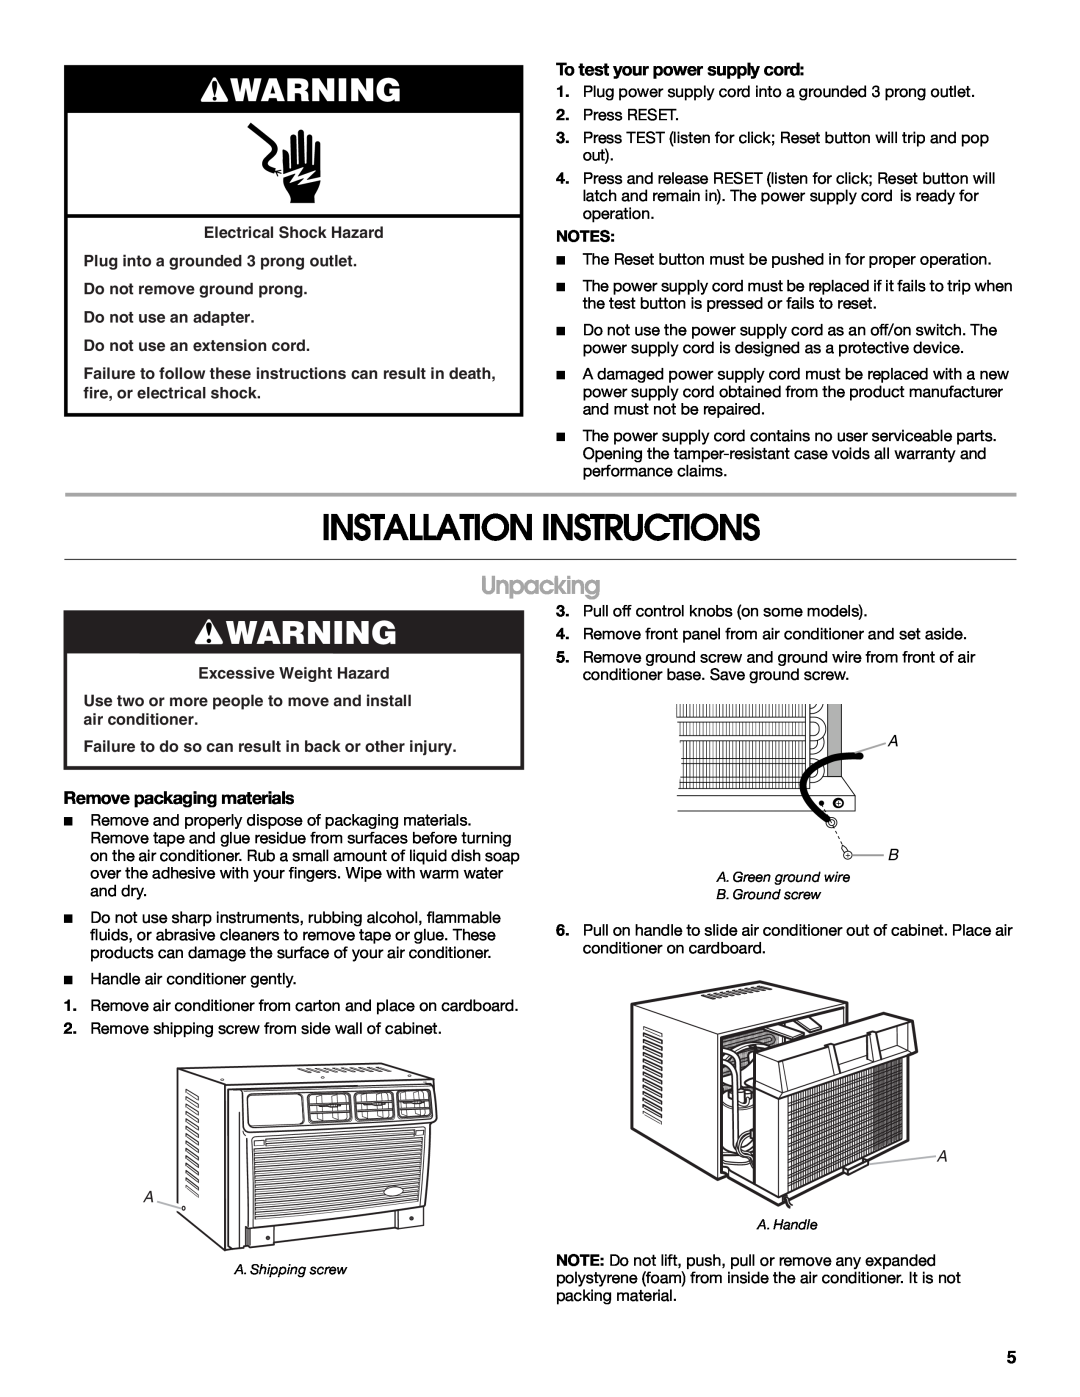 Whirlpool ACC082XR0 manual Installation Instructions, Unpacking, To test your power supply cord, Remove packaging materials 